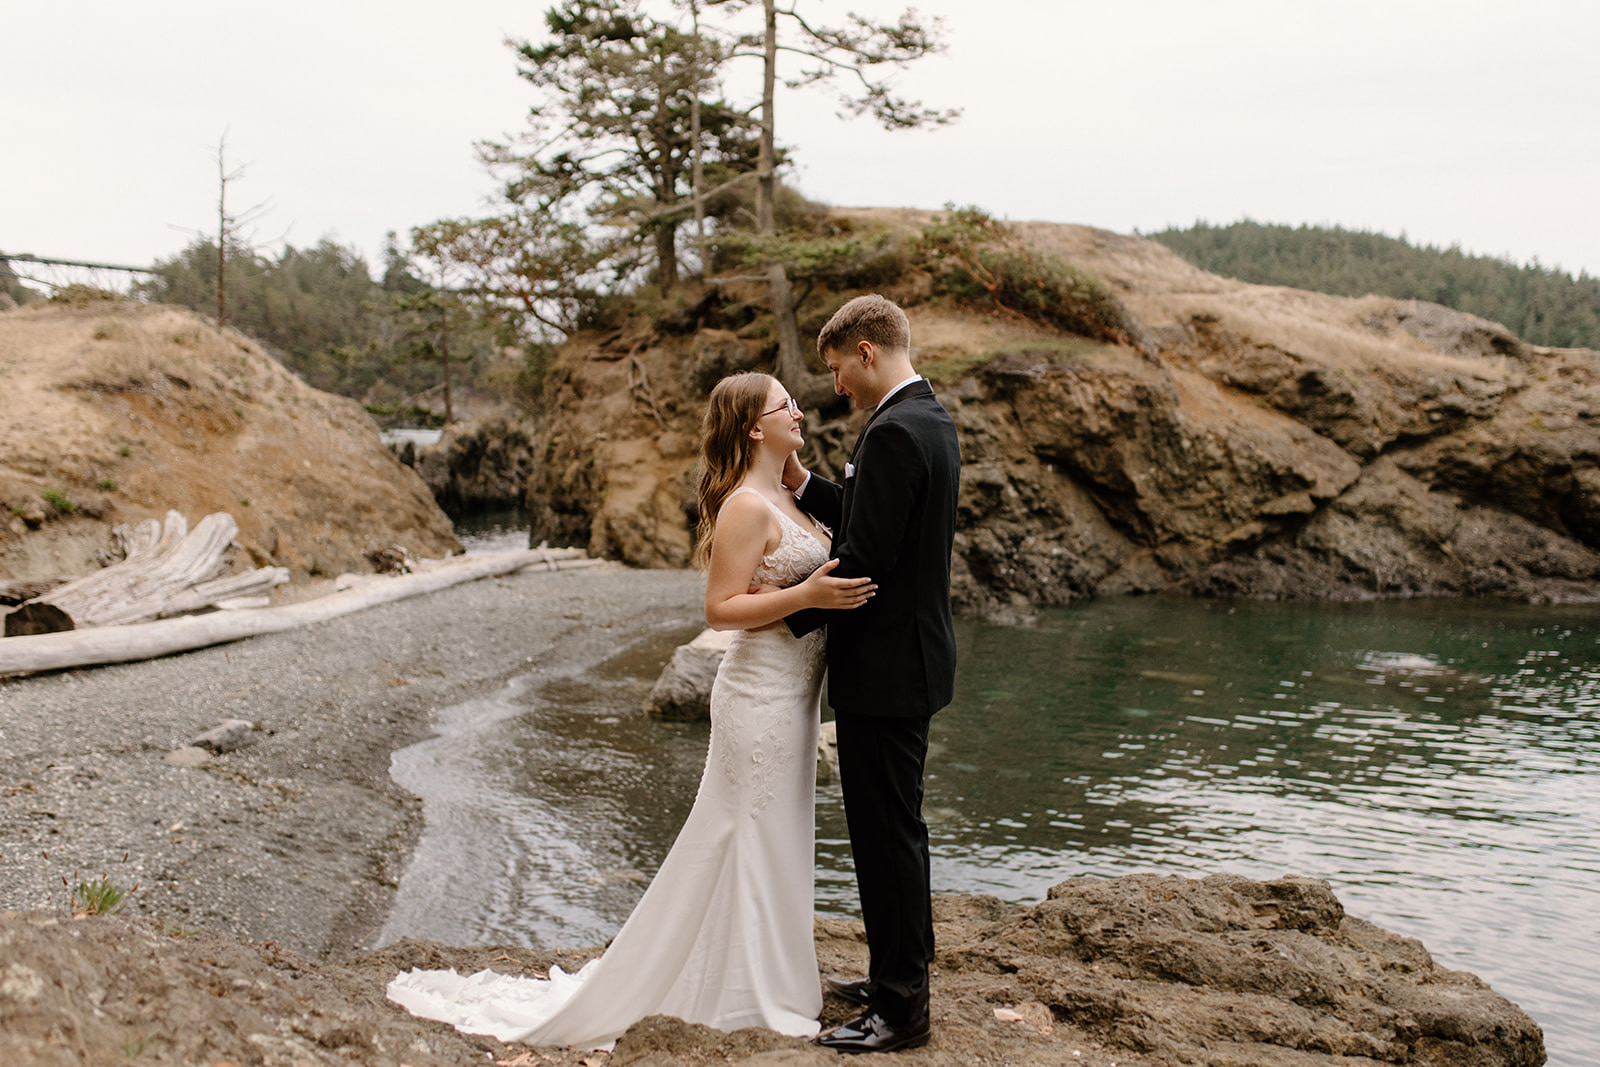 A forested, coastal photoshoot with a couple in their wedding attire at Deception Pass in Washington state.